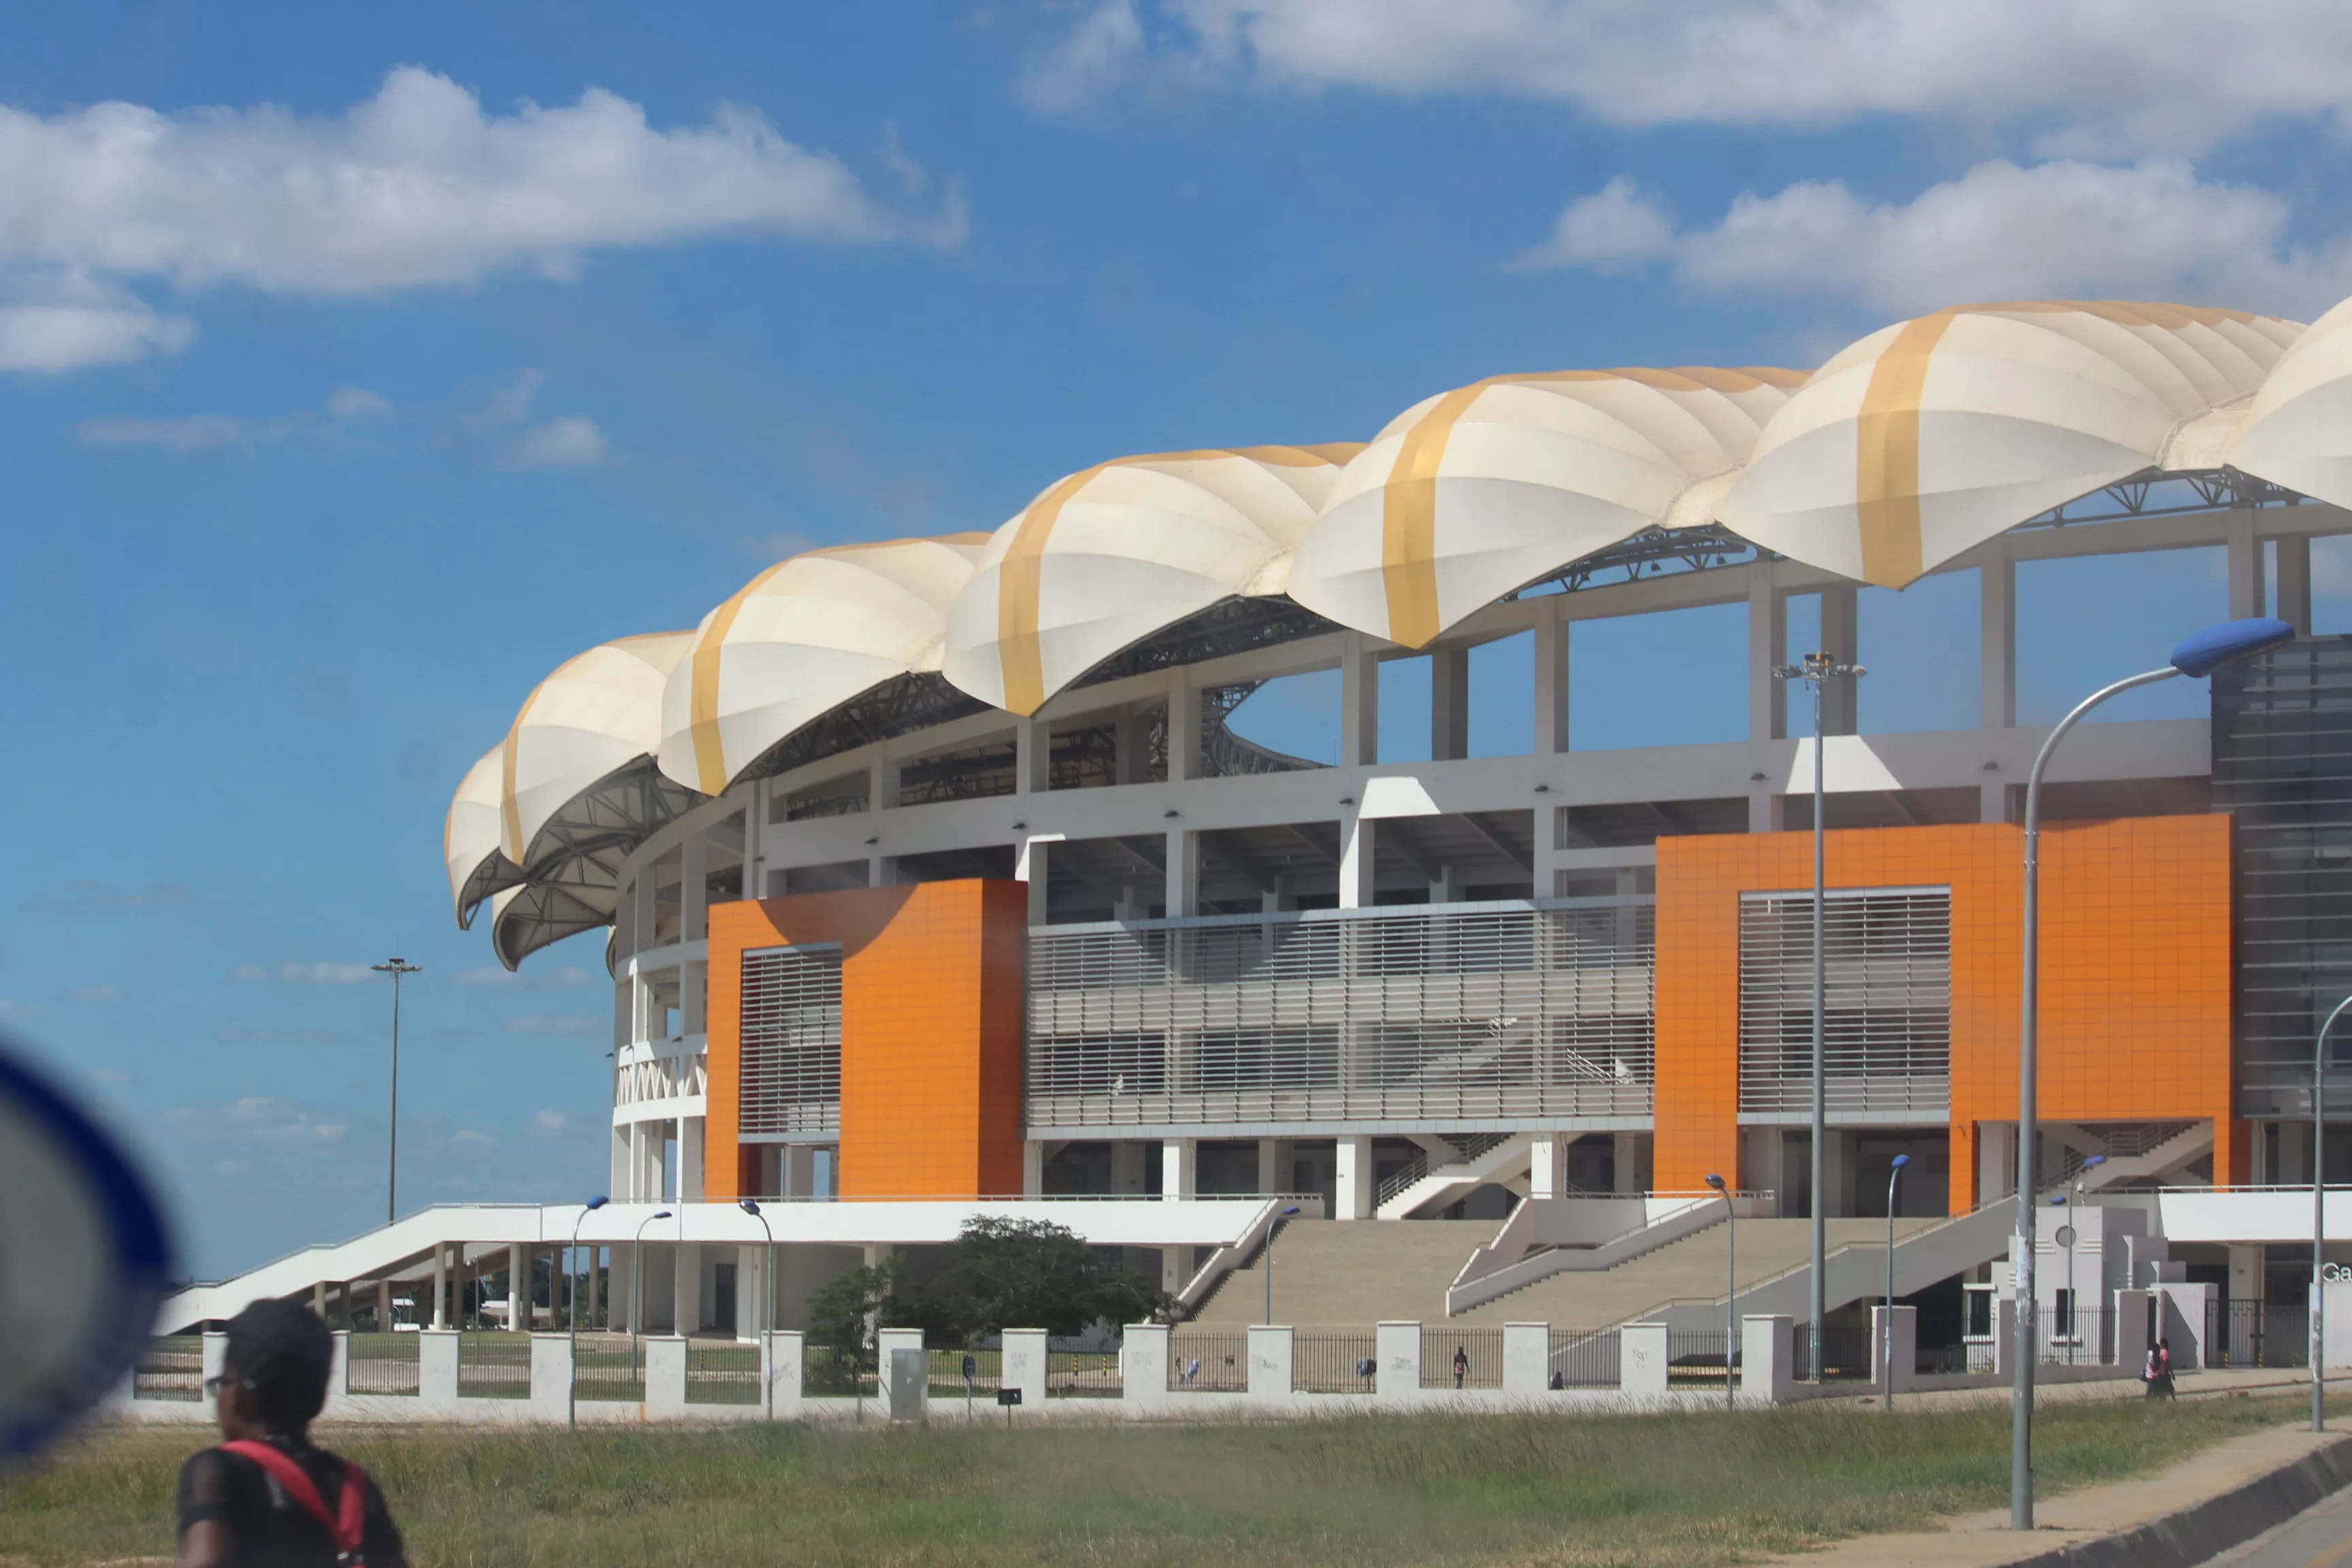 National Heroes Stadium in Zambia, Africa | Football - Rated 3.3